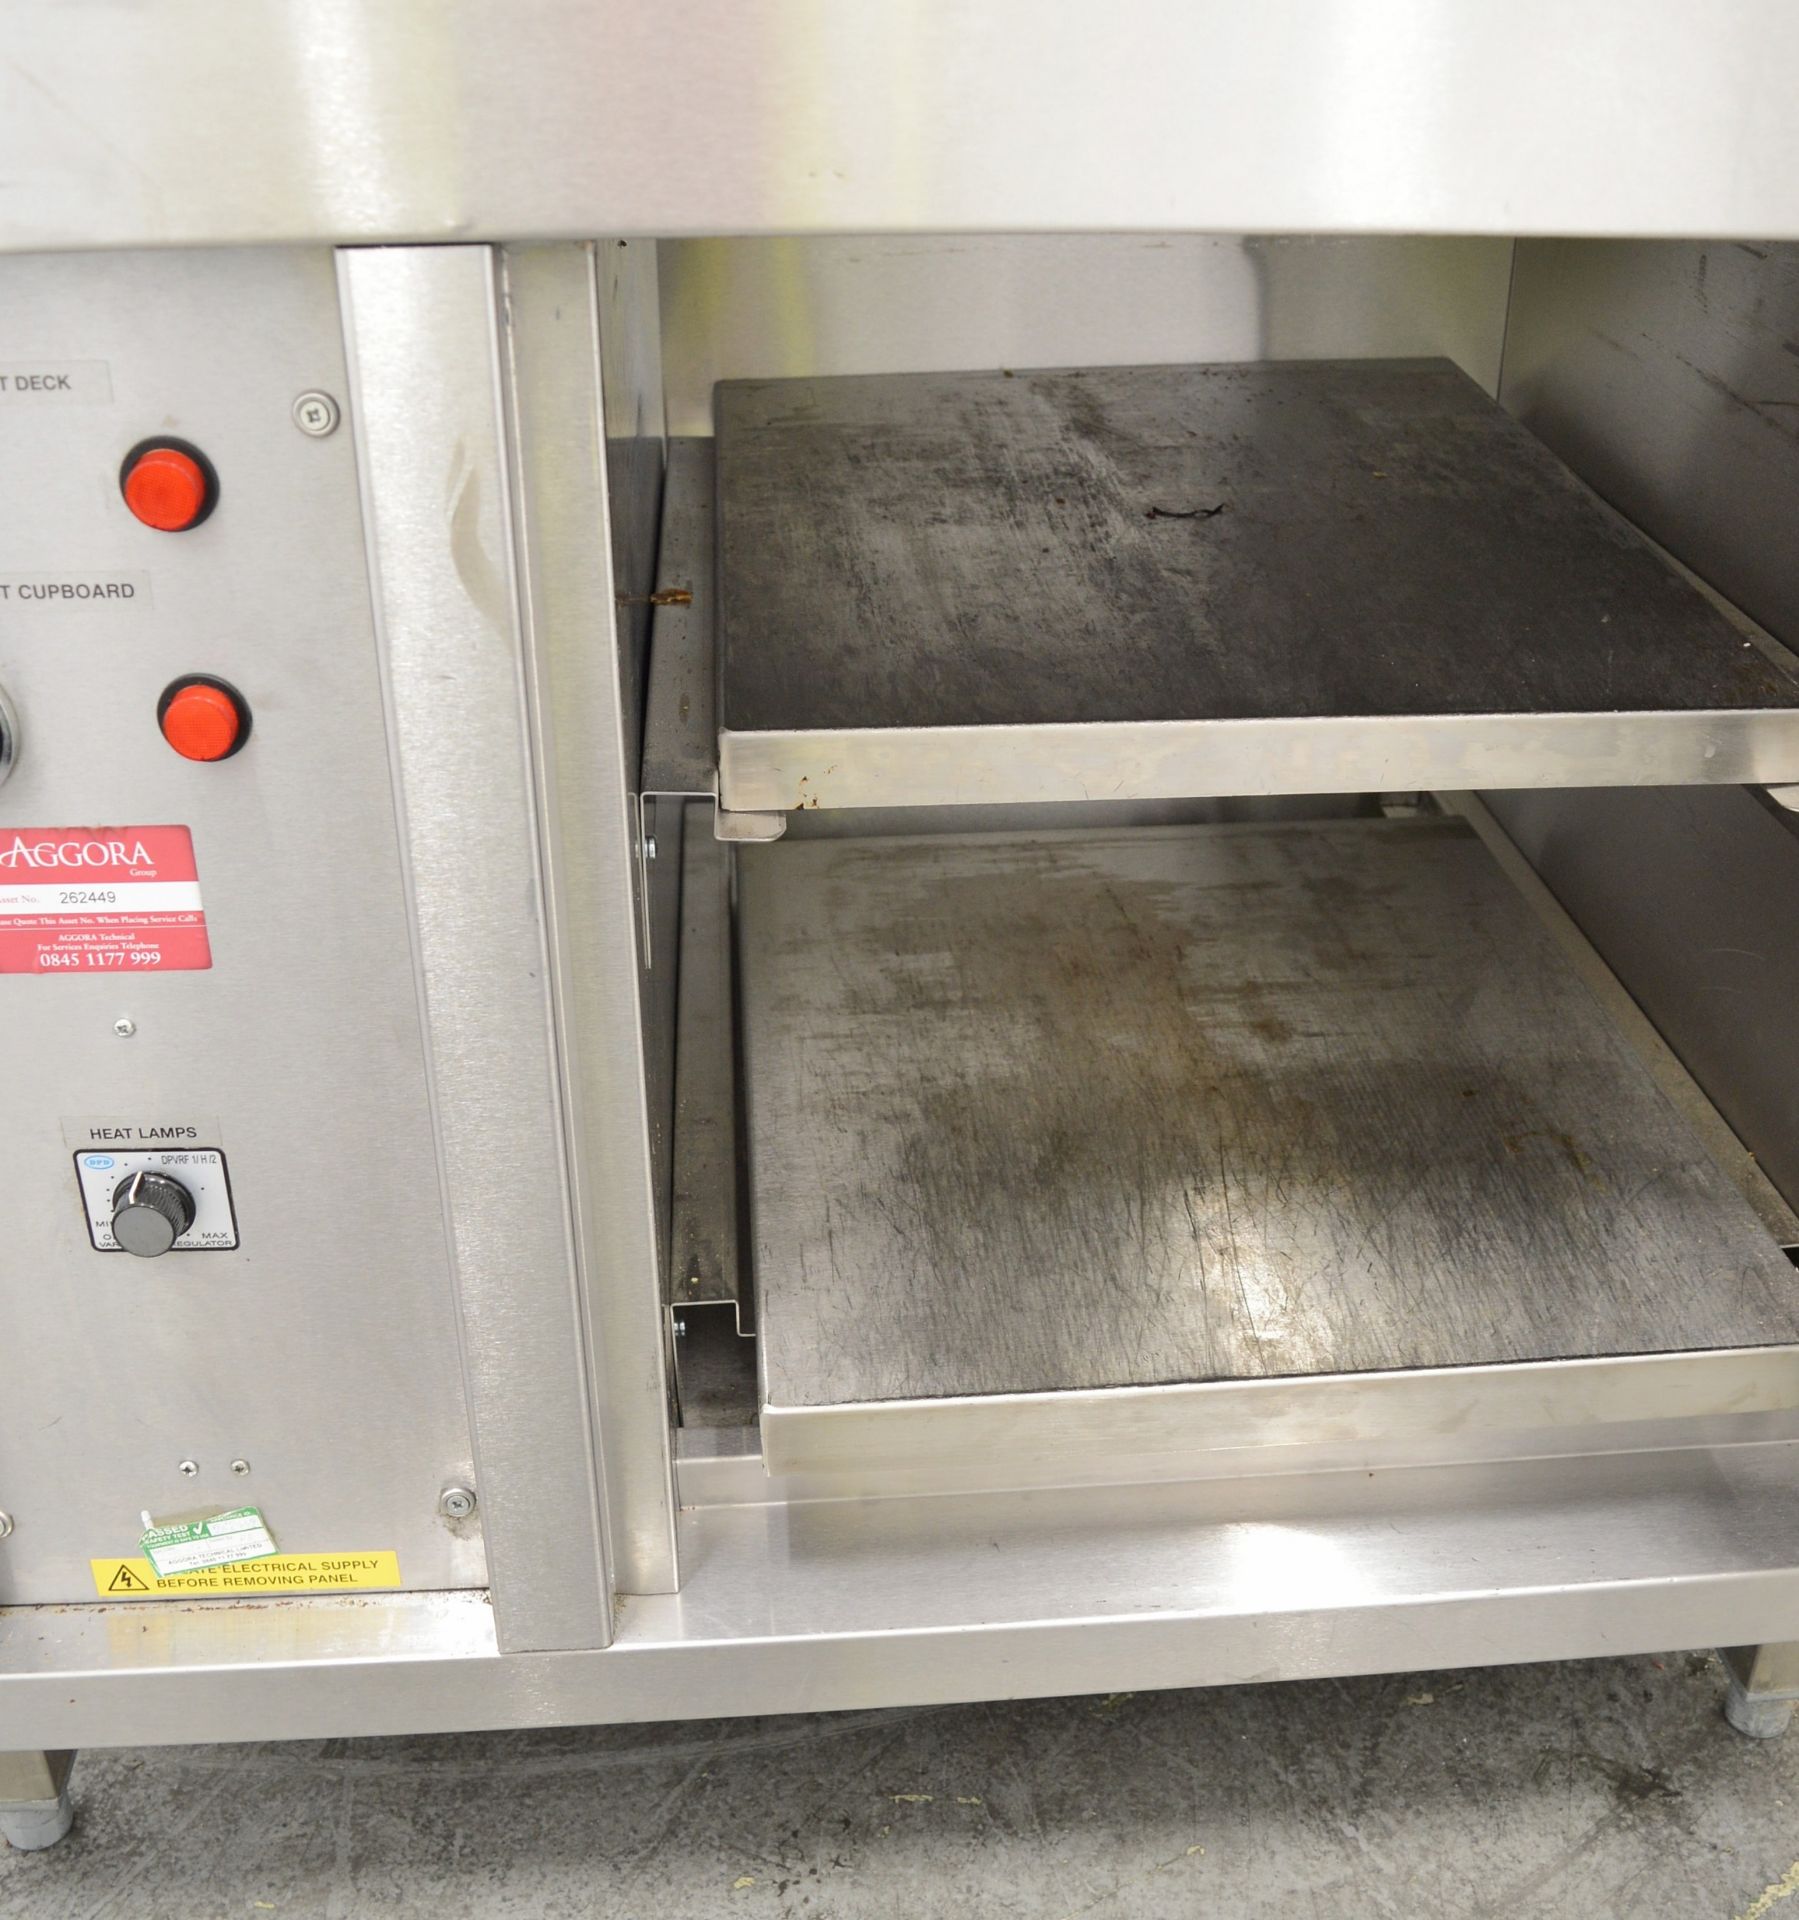 Cooking Station with Ceramic Hot Plate and Hot Cupboard 860mm Wide. - Image 5 of 7